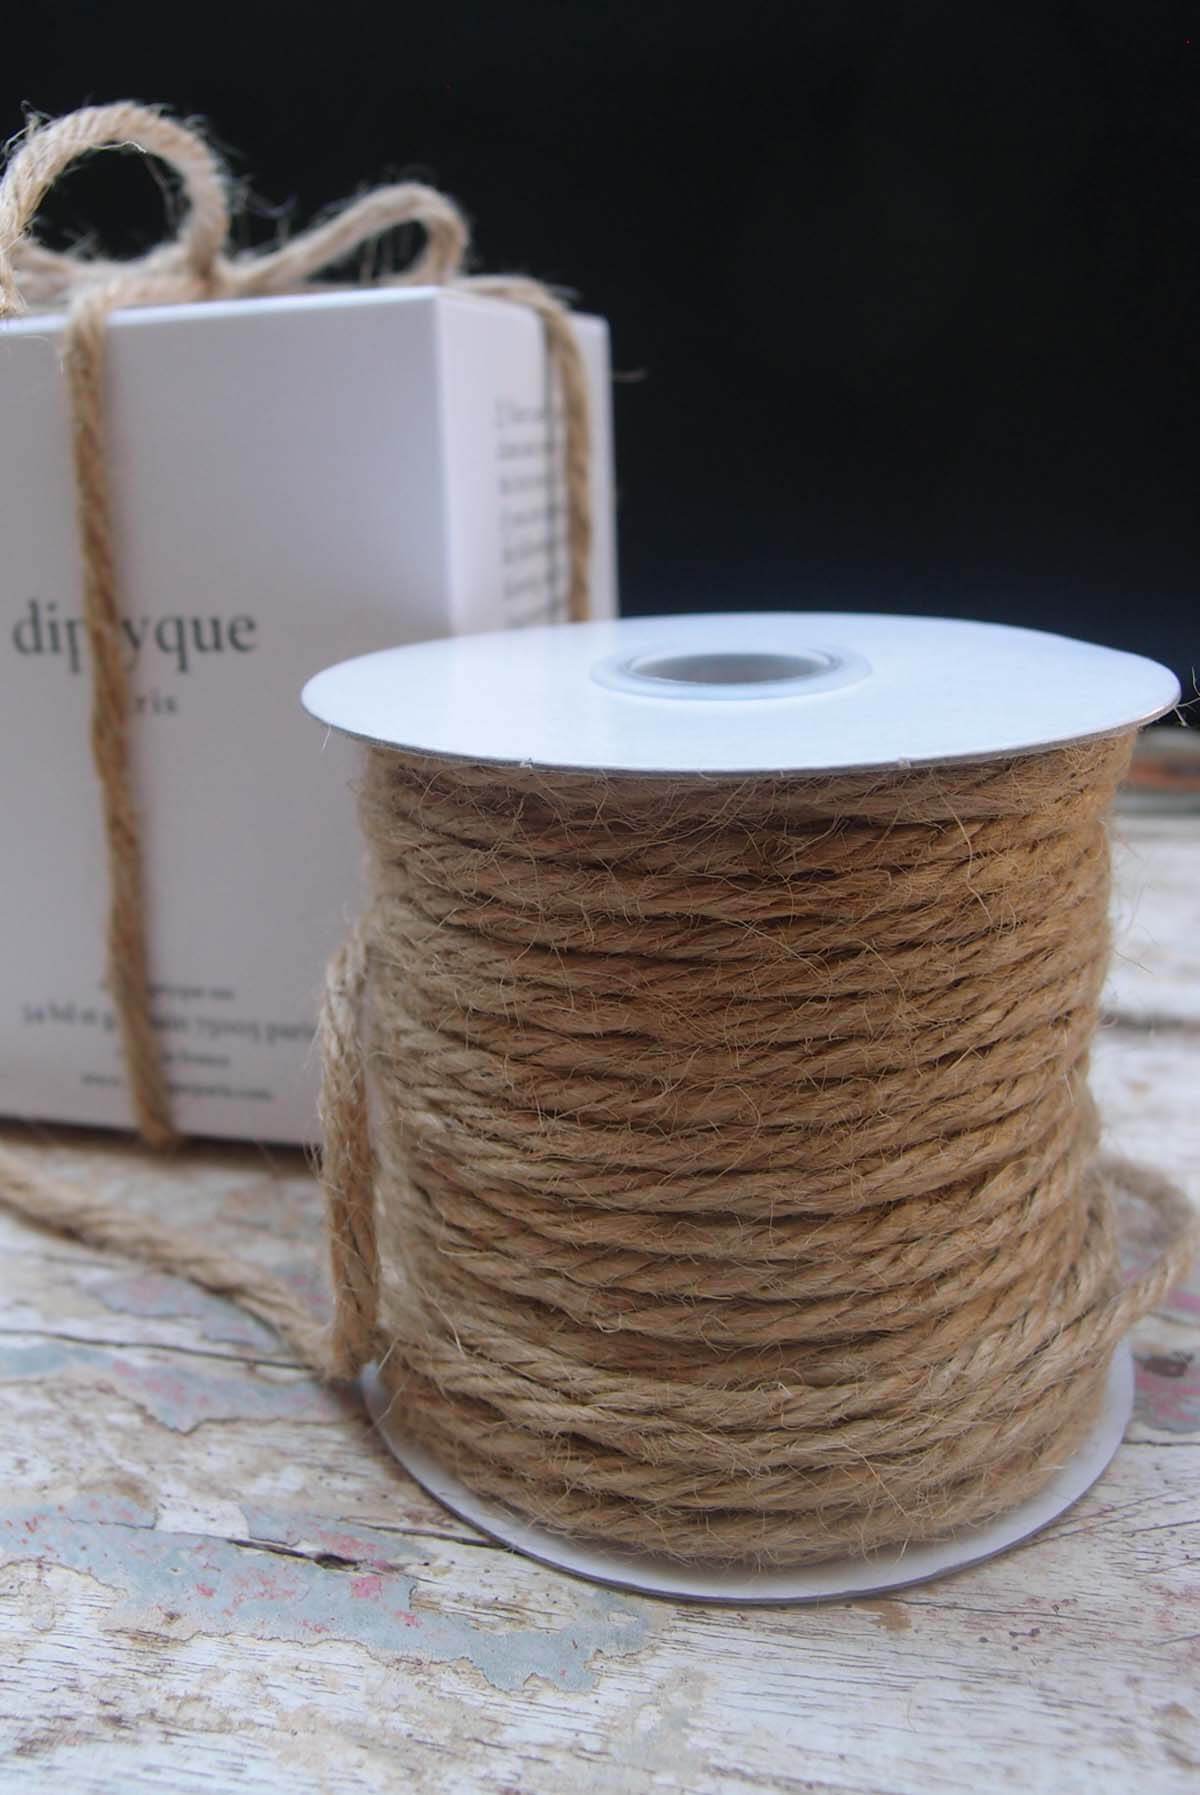 Jute Twine Rope 100yds Natural - Candles4Less